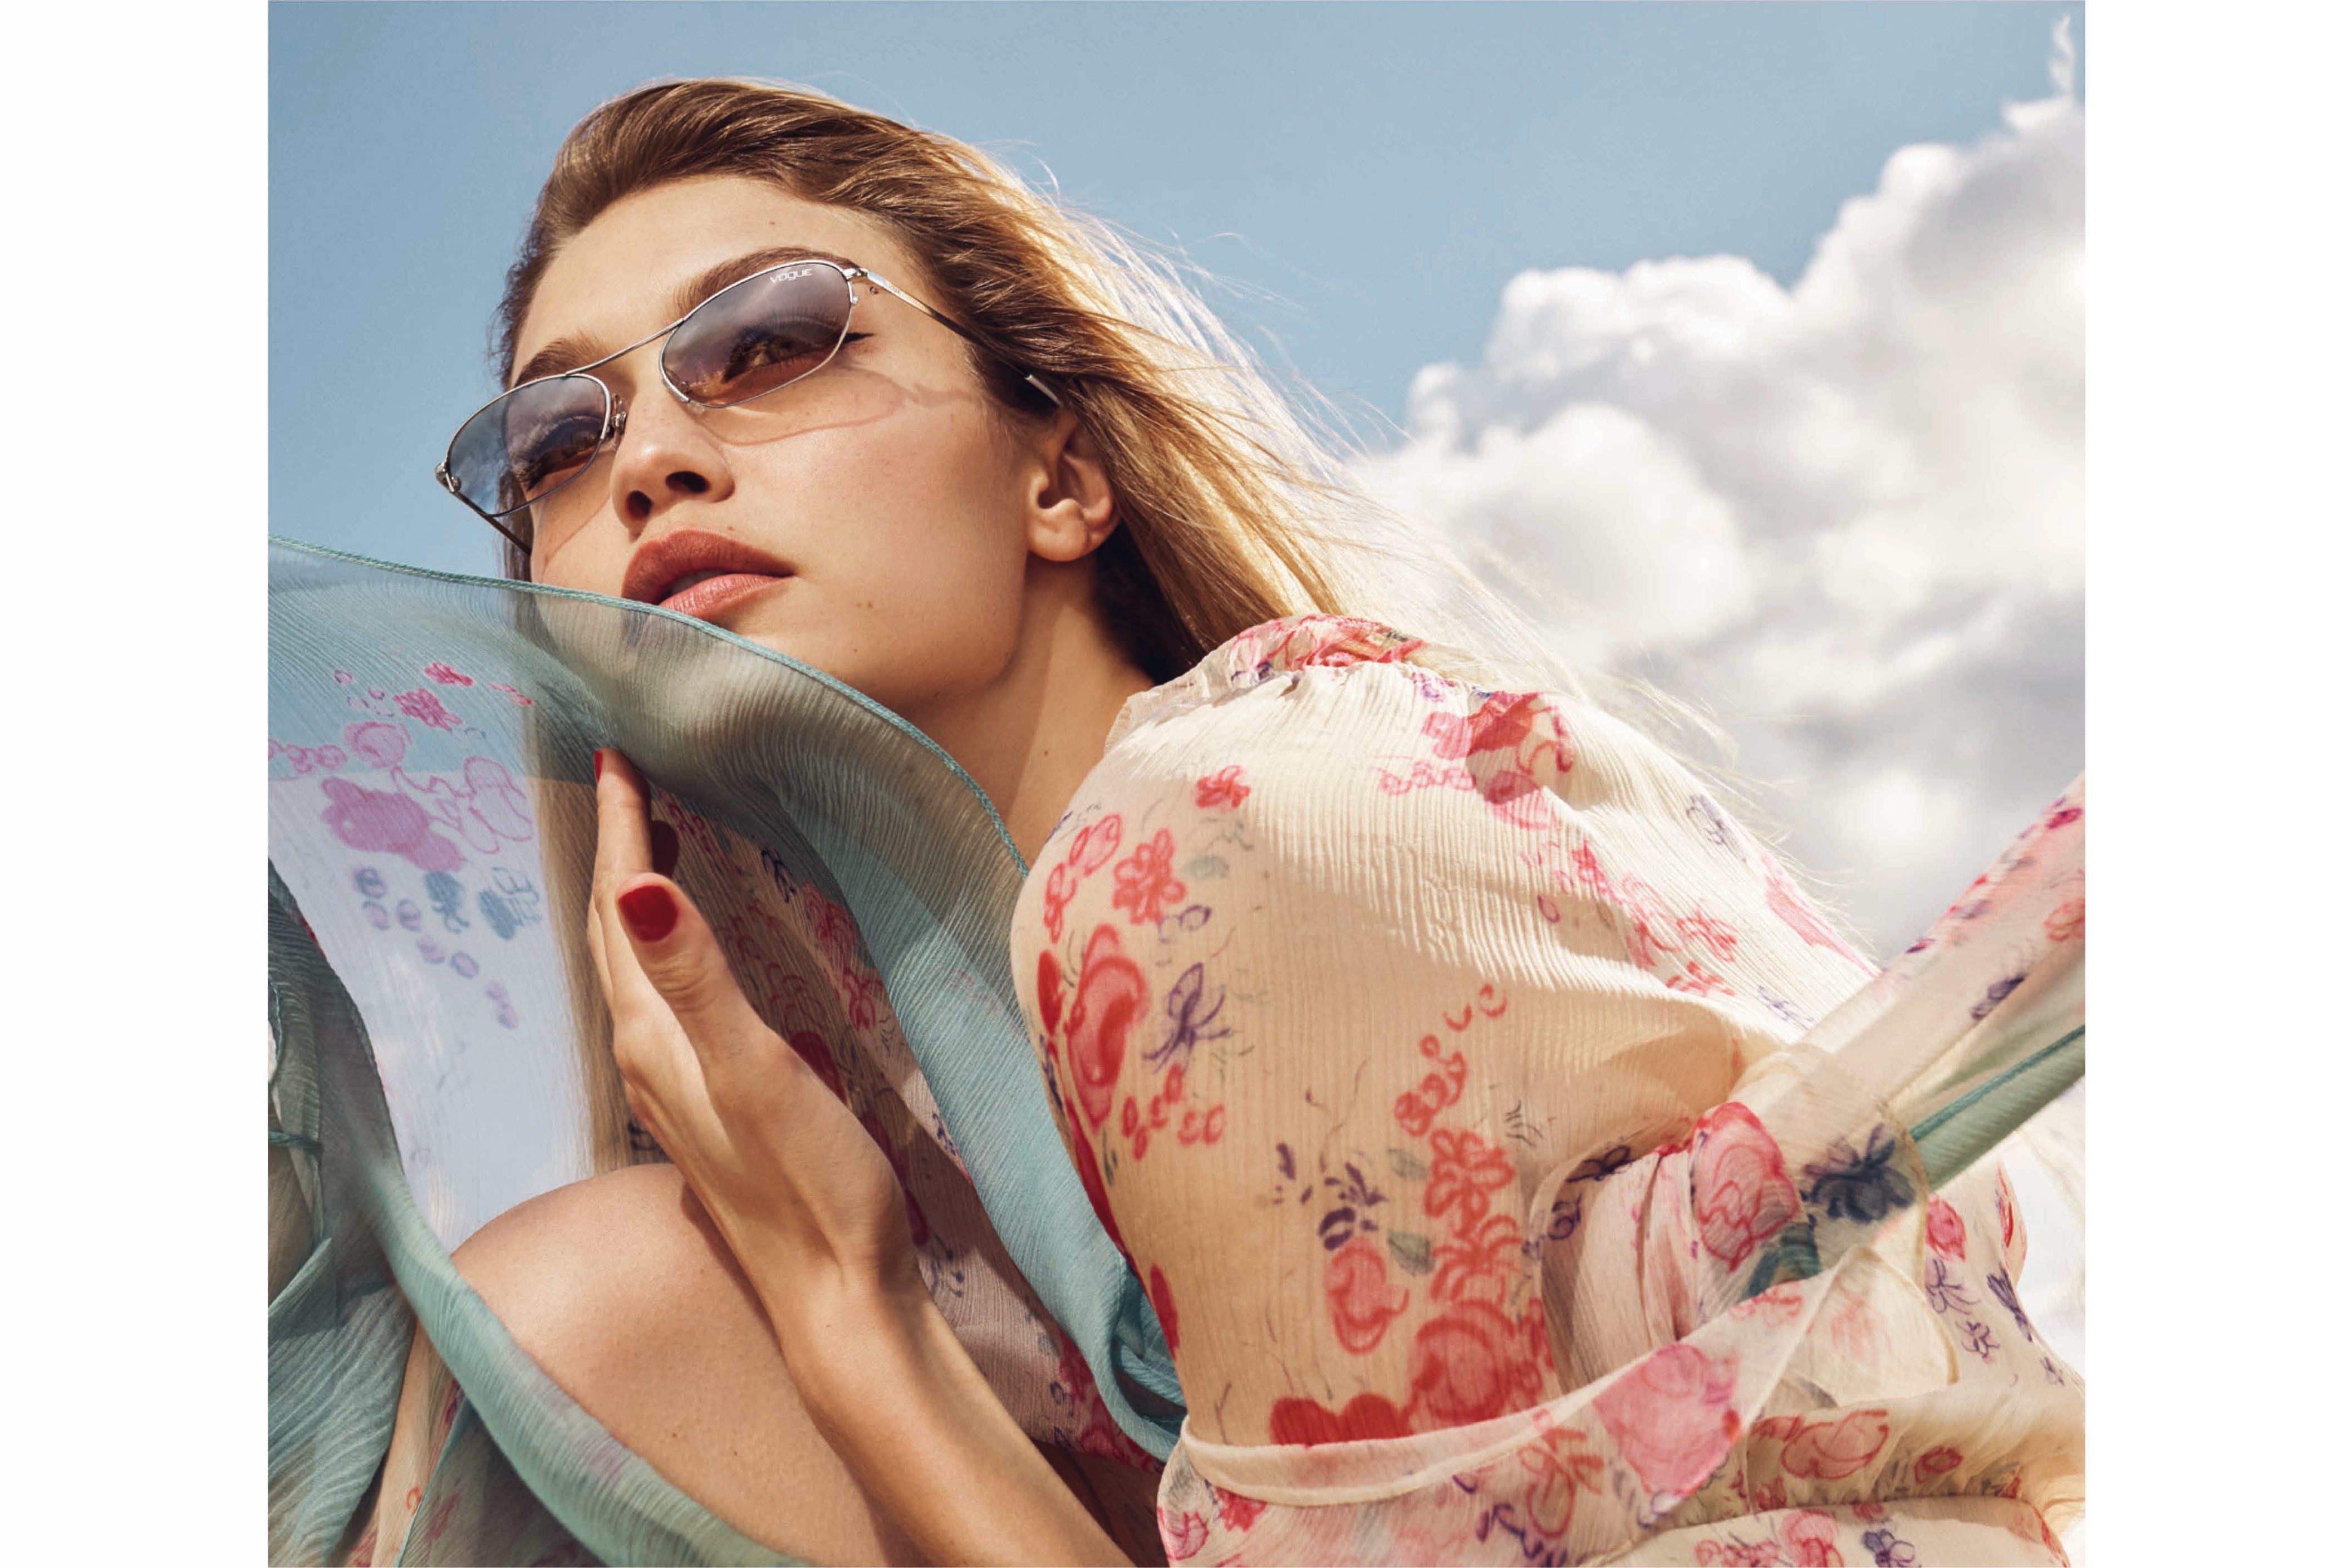 Gigi Hadid for Vogue Eyewear Drop Two Sunglasses Shades Accessories Campaign Spring Summer Drop